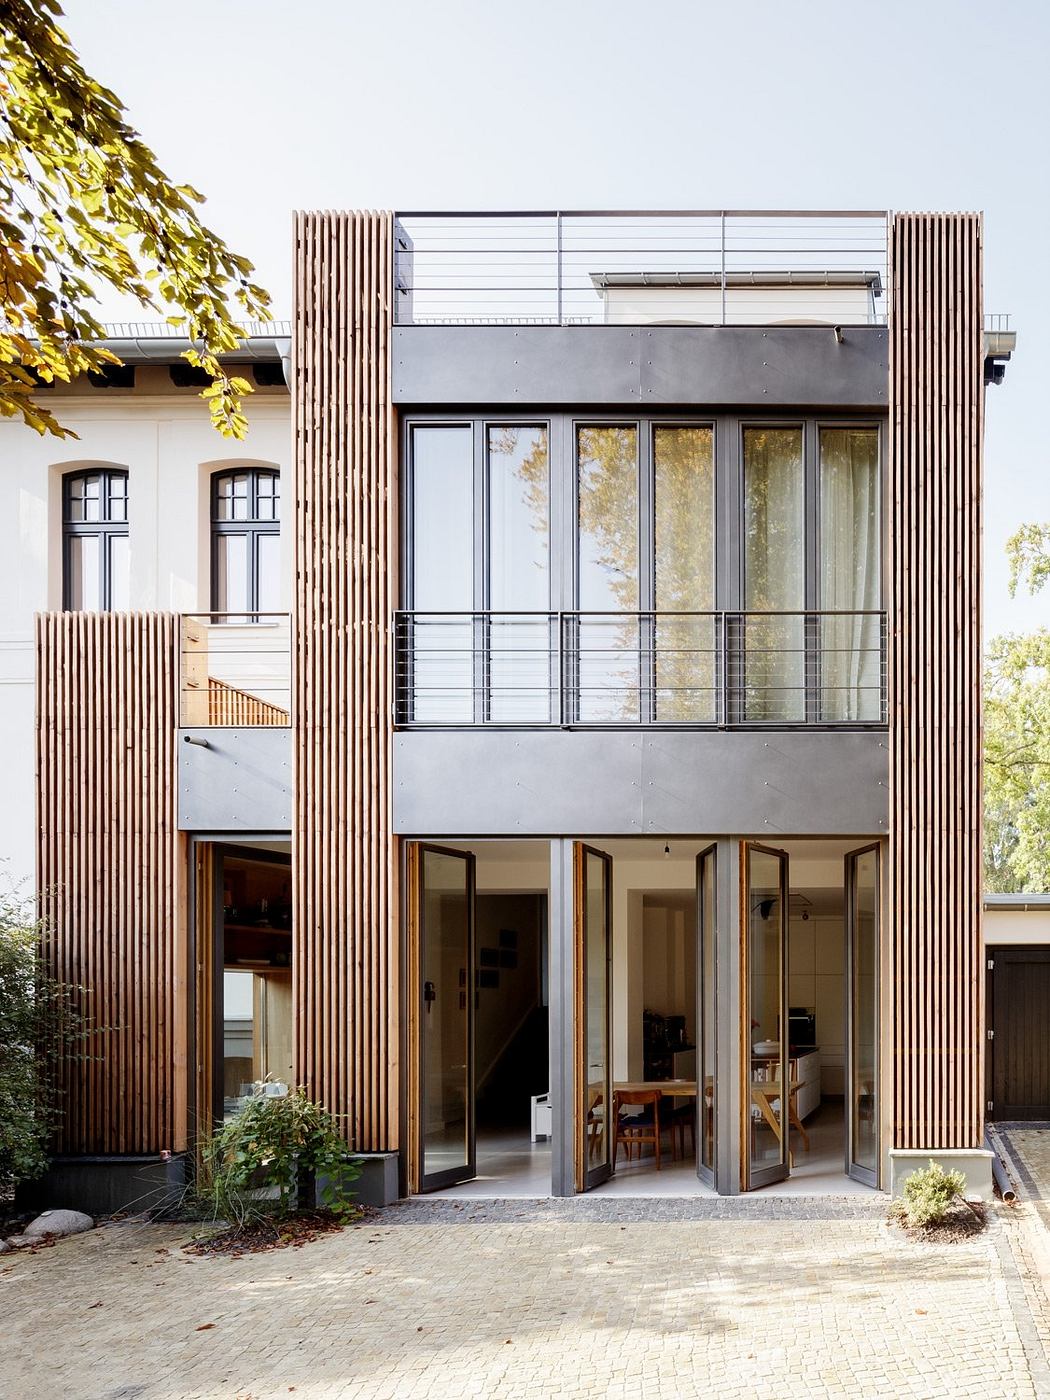 Modern architecture with wooden facade, large windows, and minimalist design.